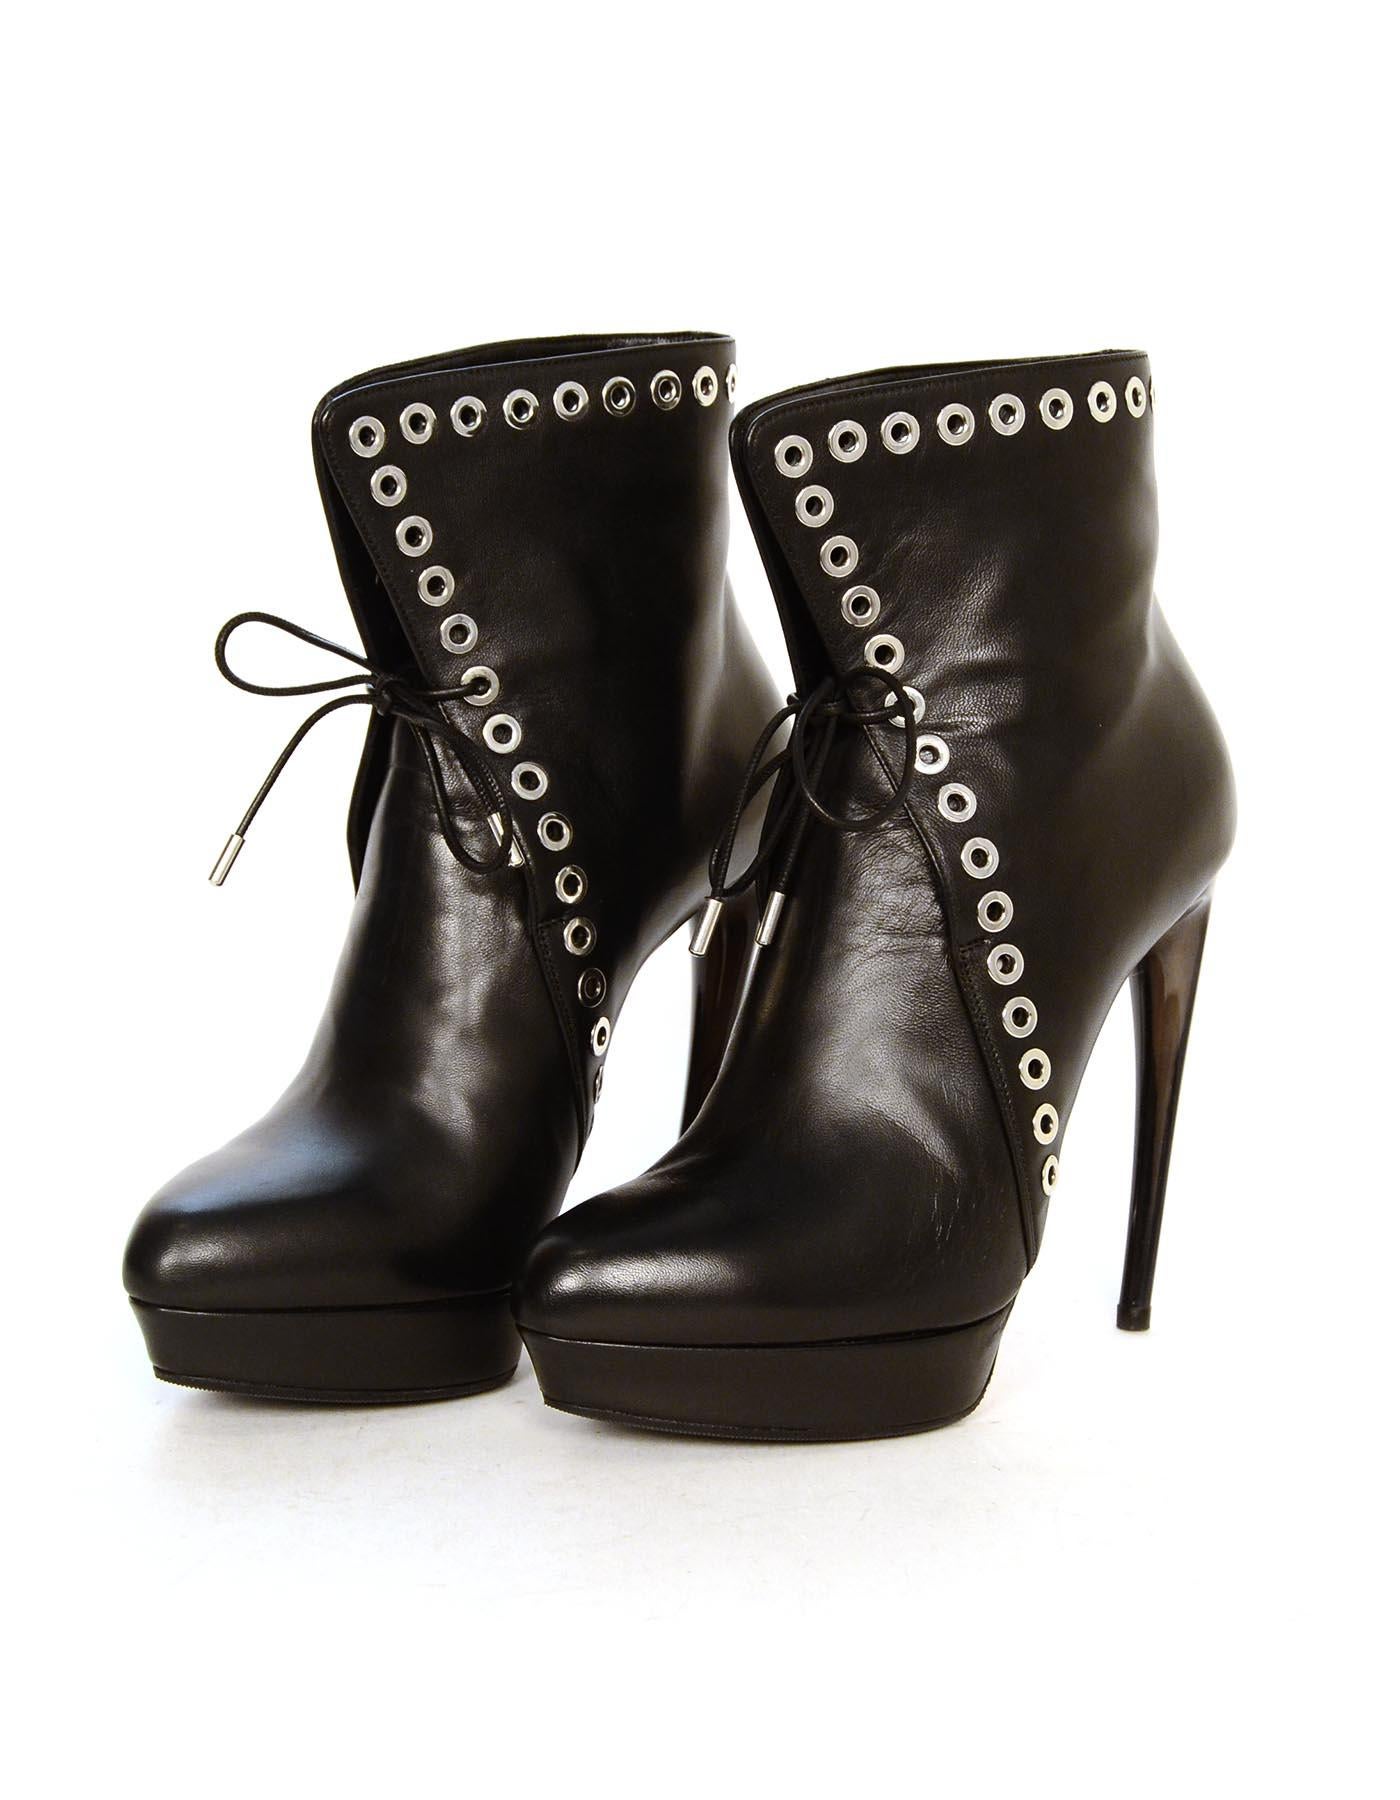 Alexander McQueen Black Leather Silvertone Grommet Heeled Platform Boots Sz 37 In Excellent Condition In New York, NY